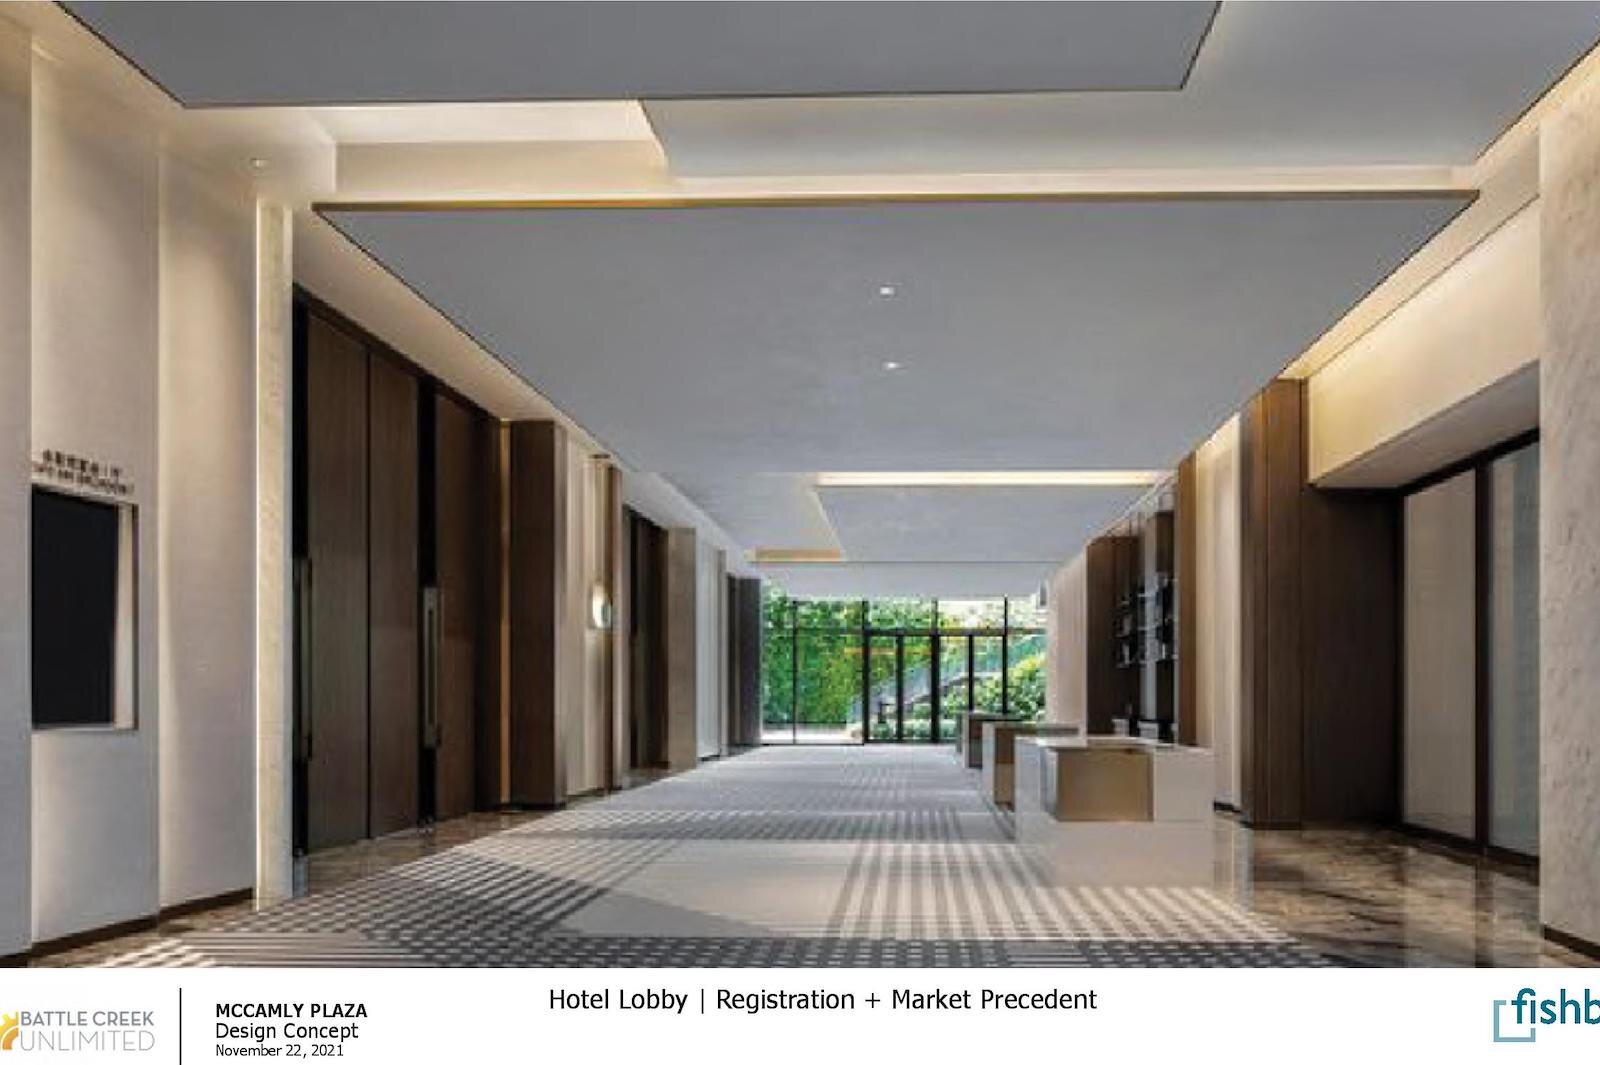  The hotel lobby of the Double Tree by day as shown in a design concept.